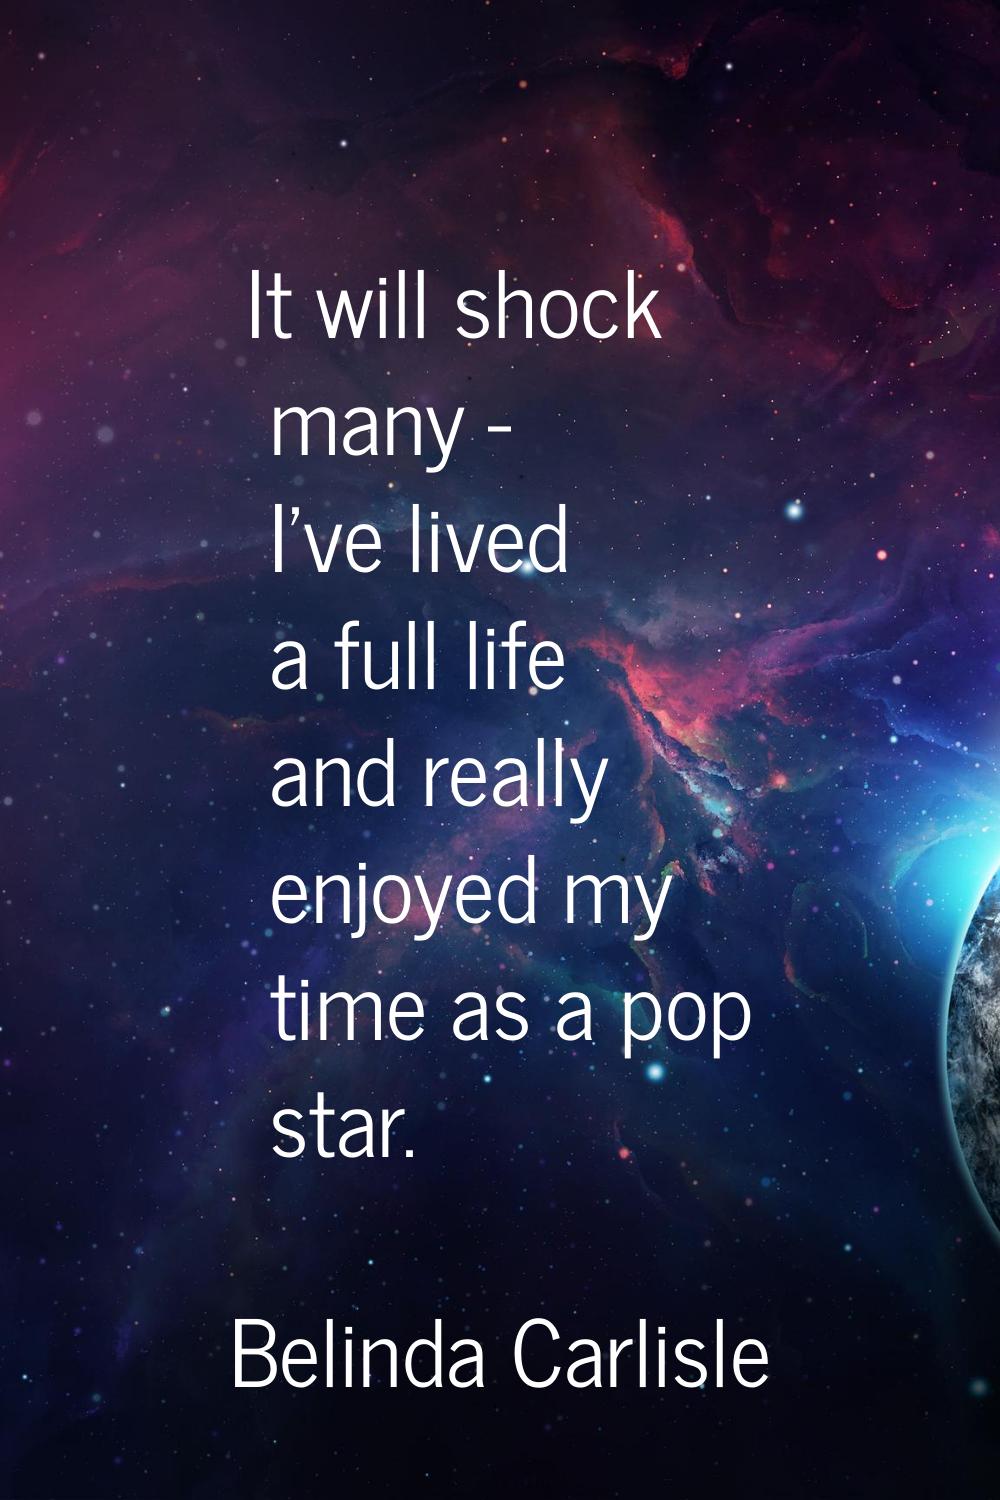 It will shock many - I've lived a full life and really enjoyed my time as a pop star.